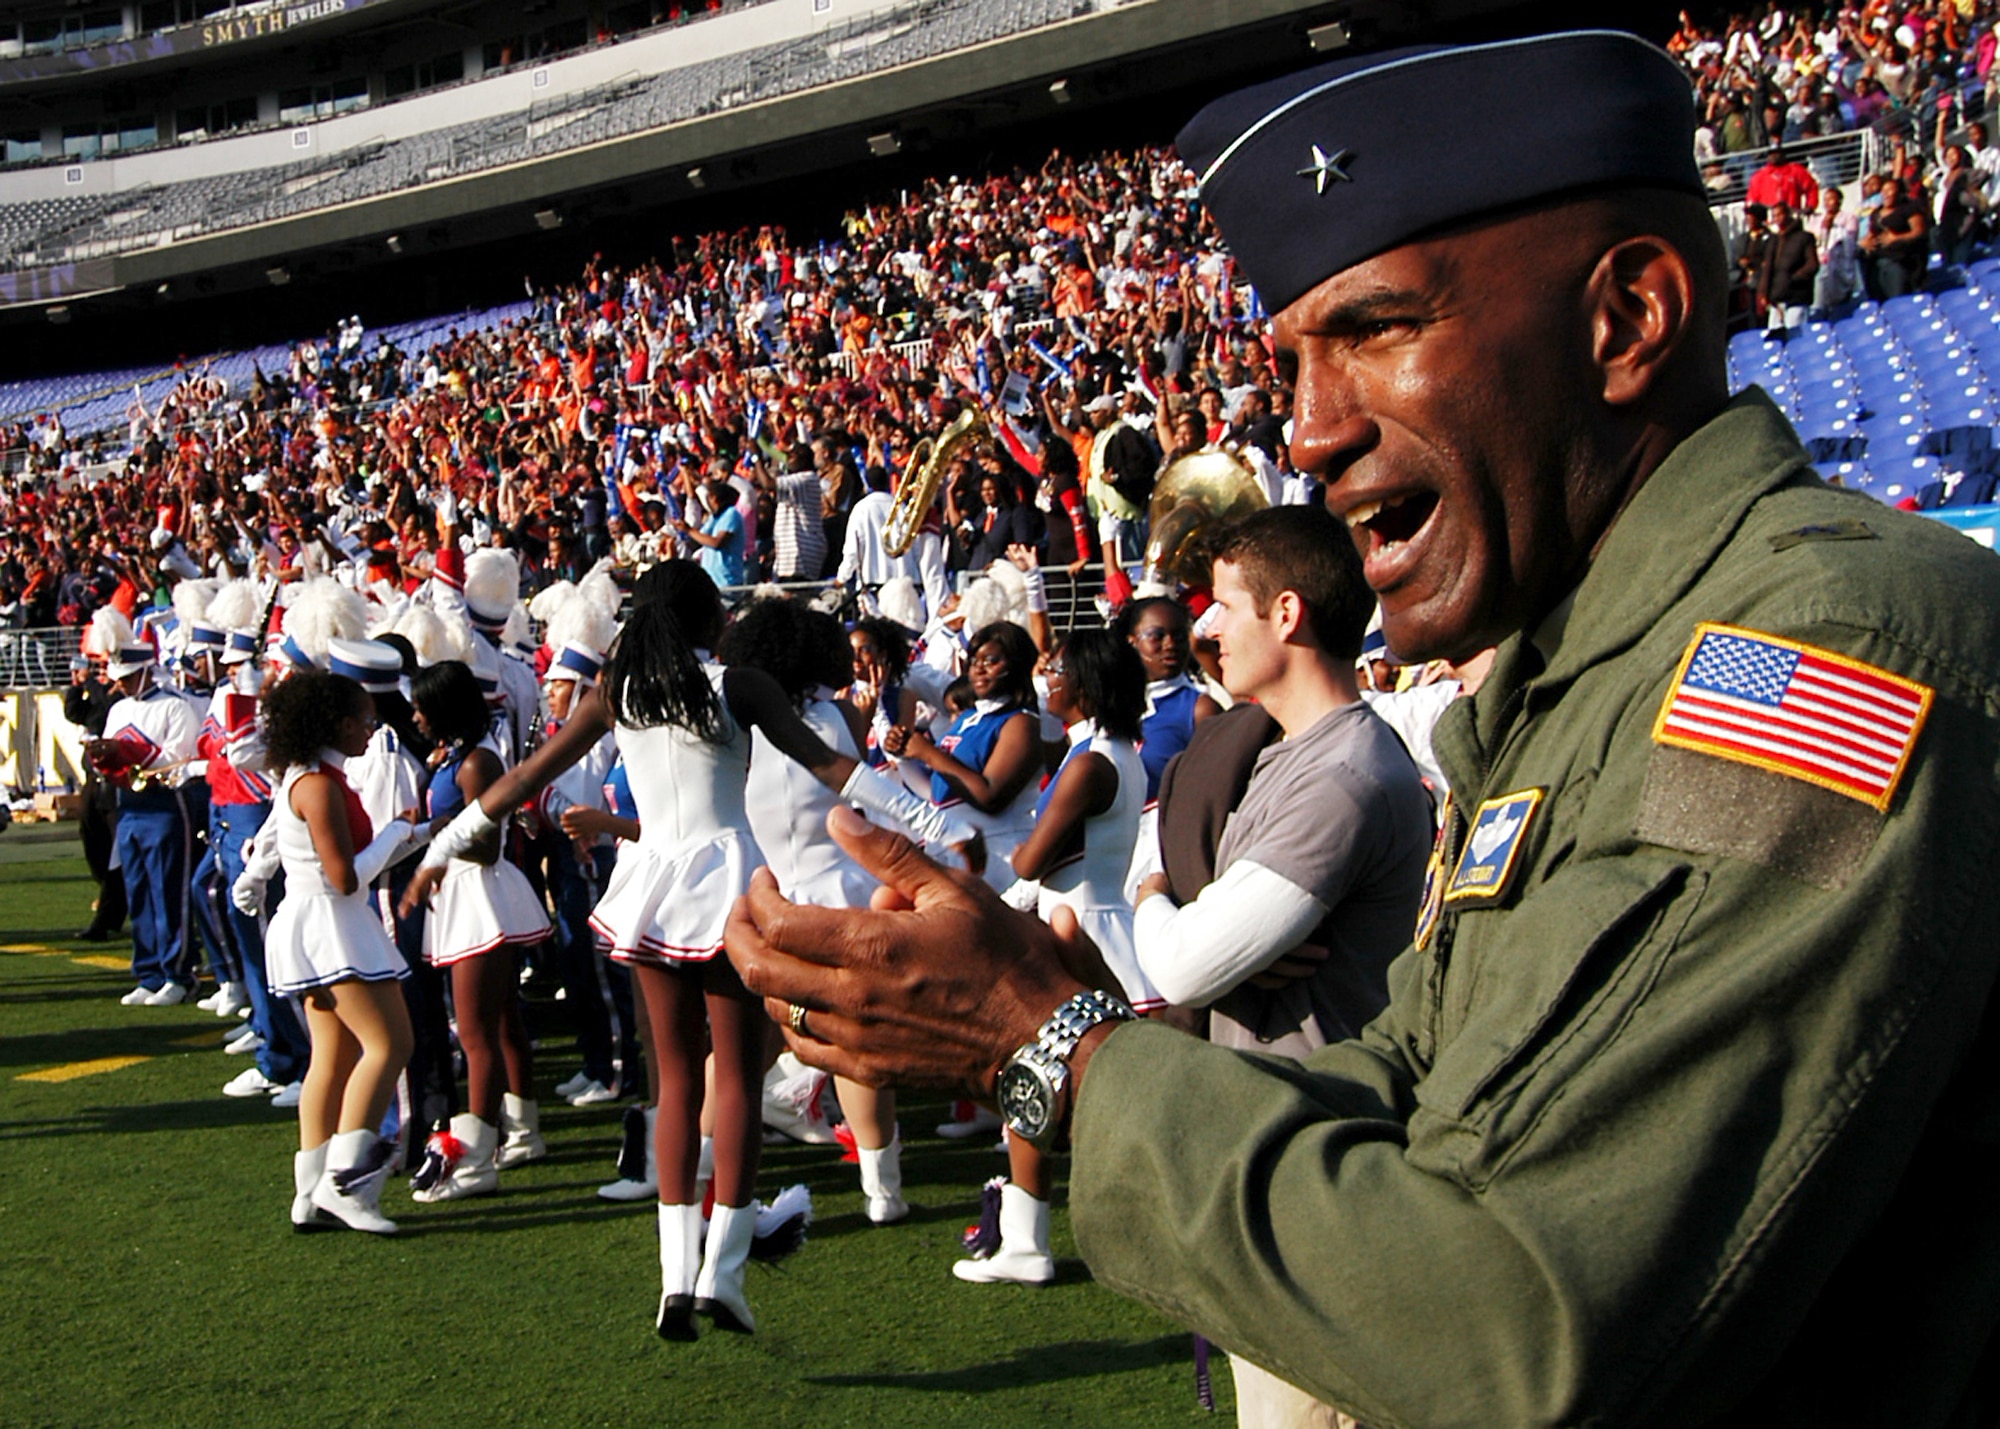 Air Force Recruiting Service Commander Brig. Gen. A.J. Stewart cheers the Engineers, Baltimore Polytechnic Institute high school’s football team, following its 16-13 win at M&T Bank Stadium Nov. 8. The Engineers battled its 119-year rival, the Baltimore City College high school Knights in the Air Force-sponsored iHigh Great American Rivalry Series. A Class of 1977 BPI alumni and varsity football wide receiver, General Stewart shared inspirational words with both teams before the game, and he presented one of two $500 college scholarships to Engineers player Arnold Farmer. (U.S. Air Force photo/Tech. Sgt. Jennifer Lindsey)